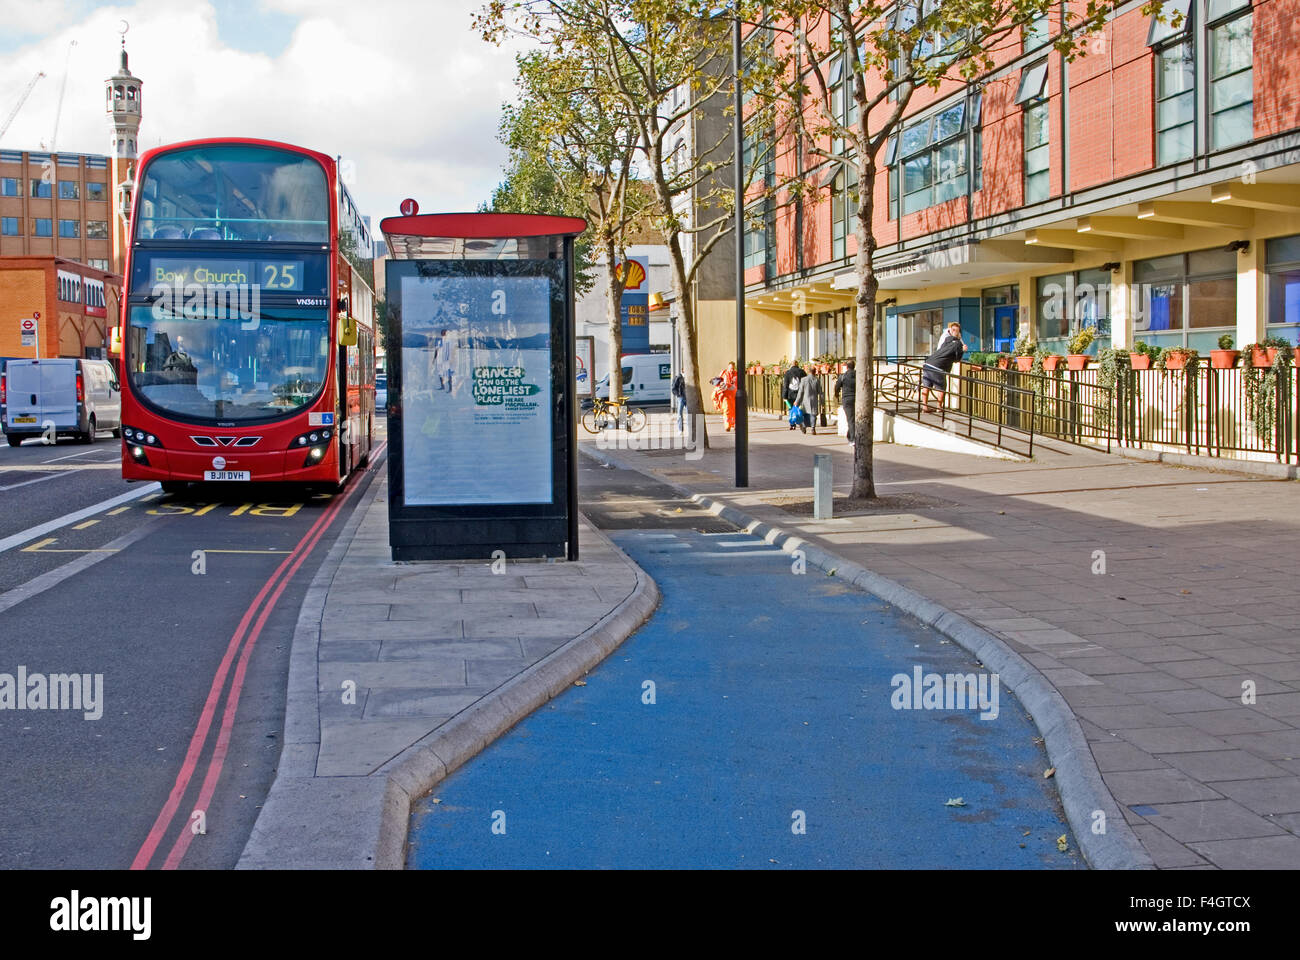 A red modern double deck London bus passes a bus stop with a new cycle track bypass in Whitechapel, East London. Investment in bicycle infrastructure. Stock Photo